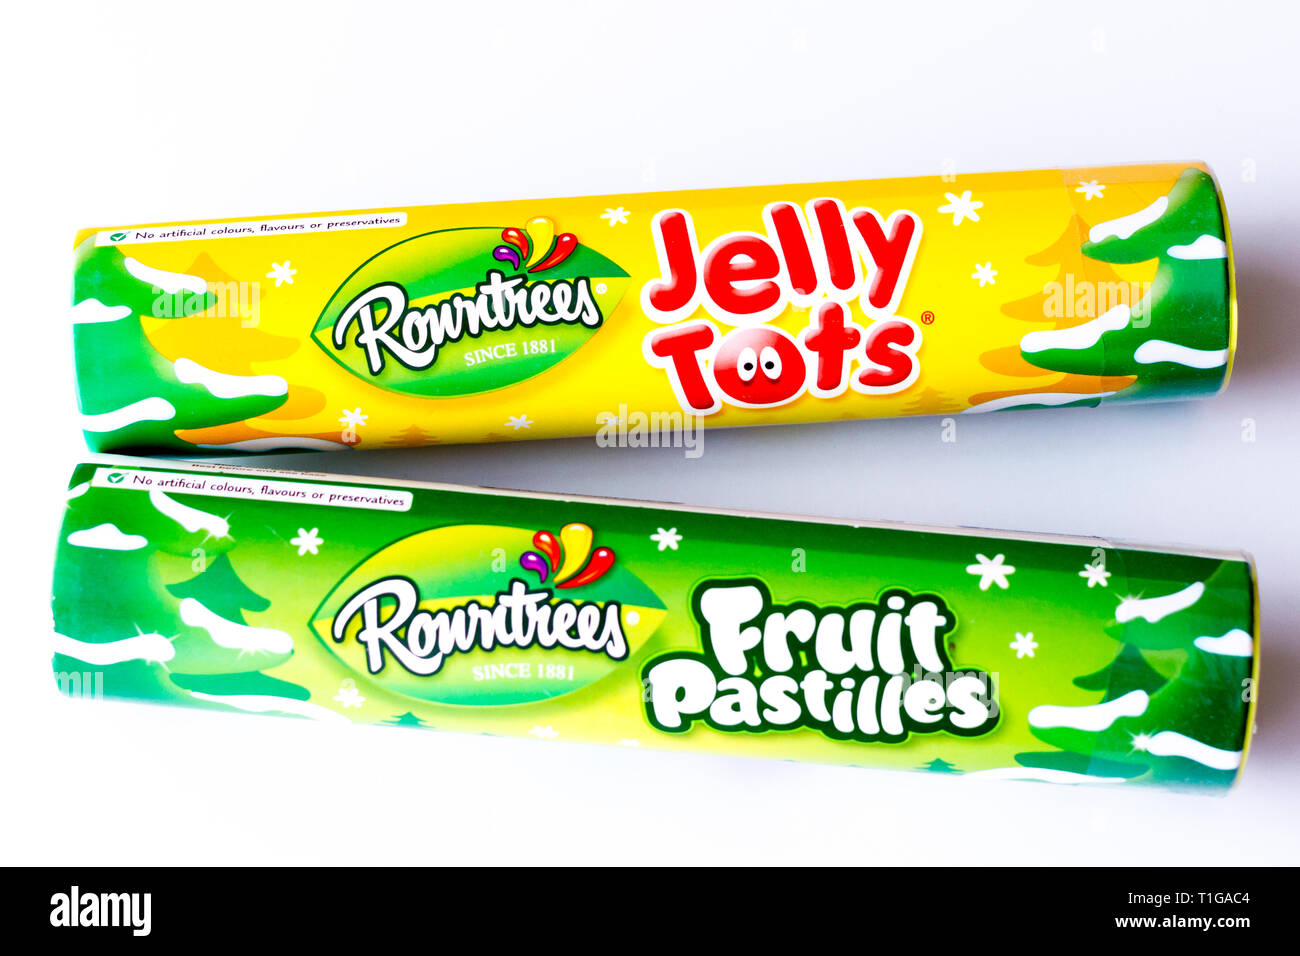 Tubes of Rowntrees Jelly Tots and Fruit Pastilles Stock Photo - Alamy